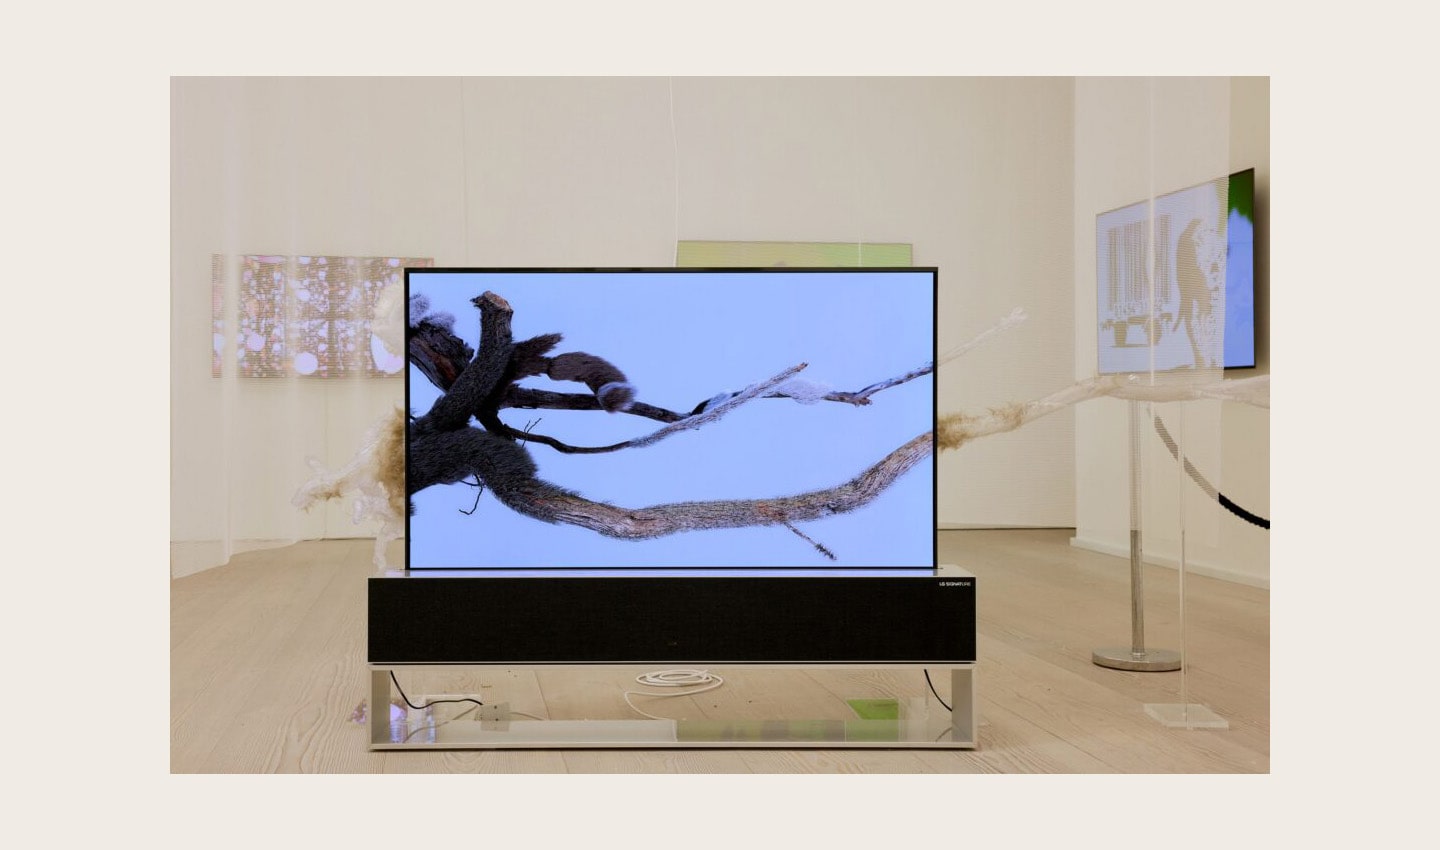 'The Warm Tree' by Ruofan Chen displayed on LG OLED TV